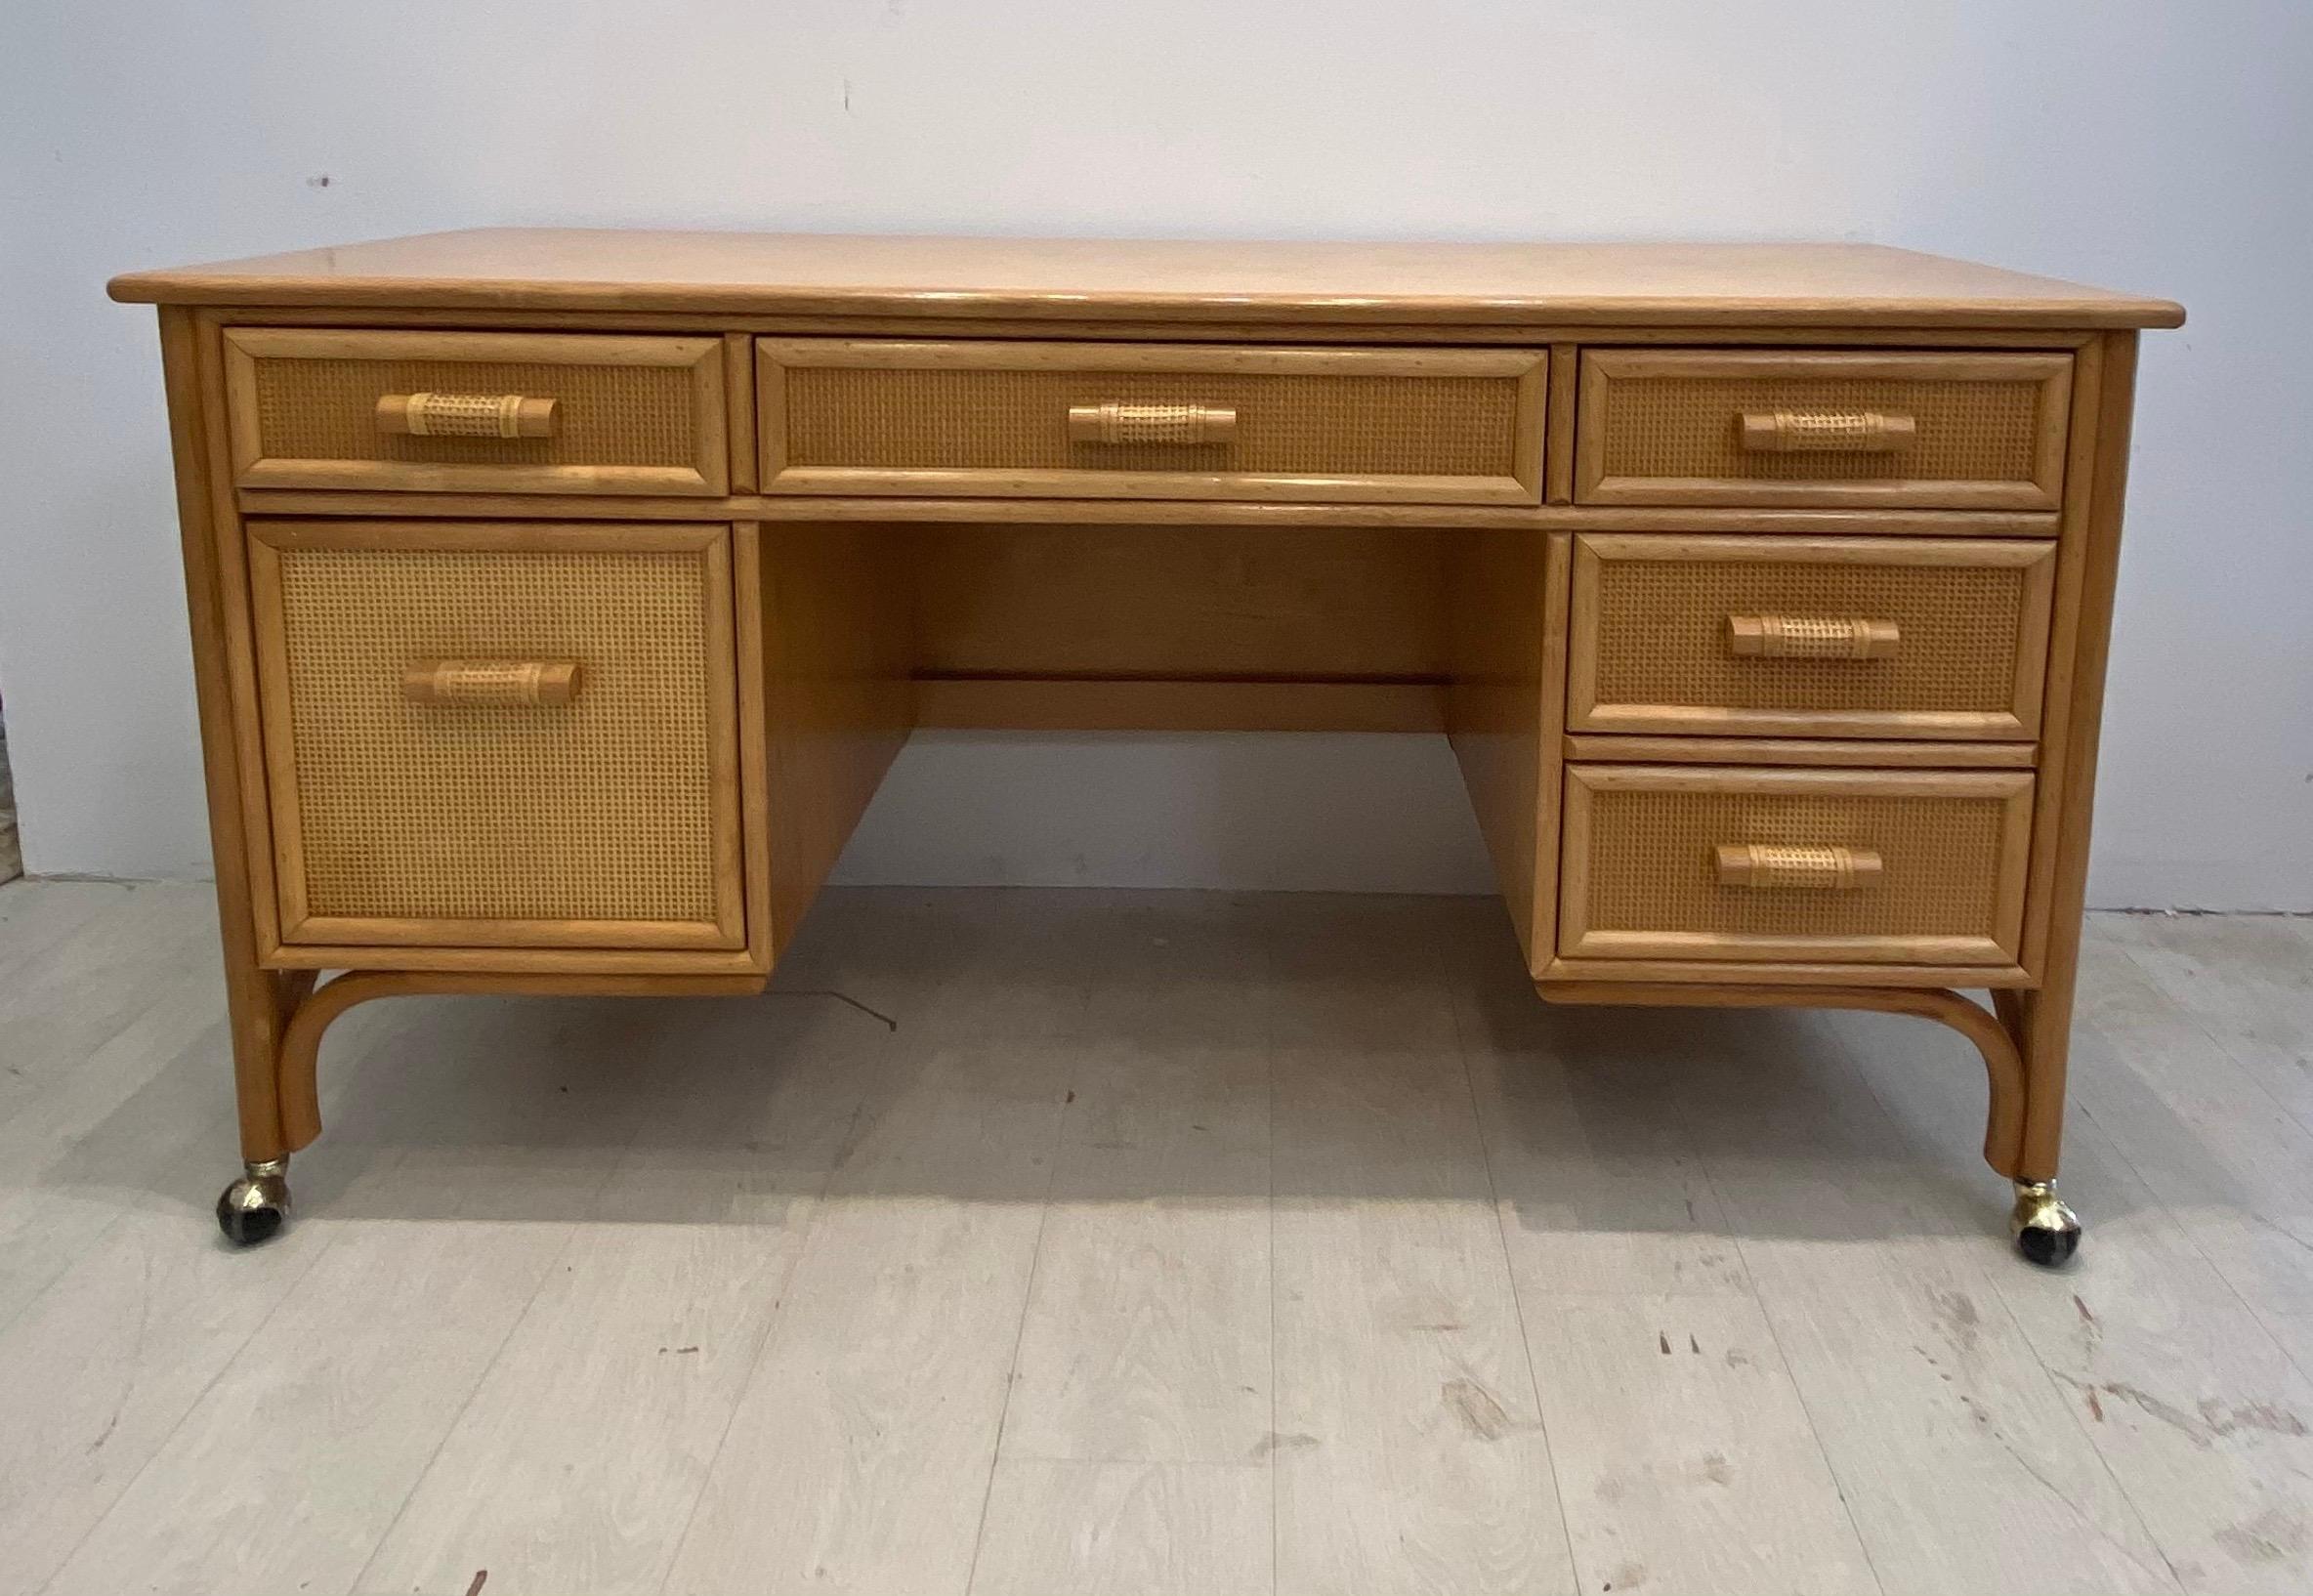 Large desk with 6 drawers. Lots of storage in this large desk. File drawer with 5 other deep drawers. Very well constructed in very good condition. Nice original finish was well cared for. Bamboo look with the strength of rattan.